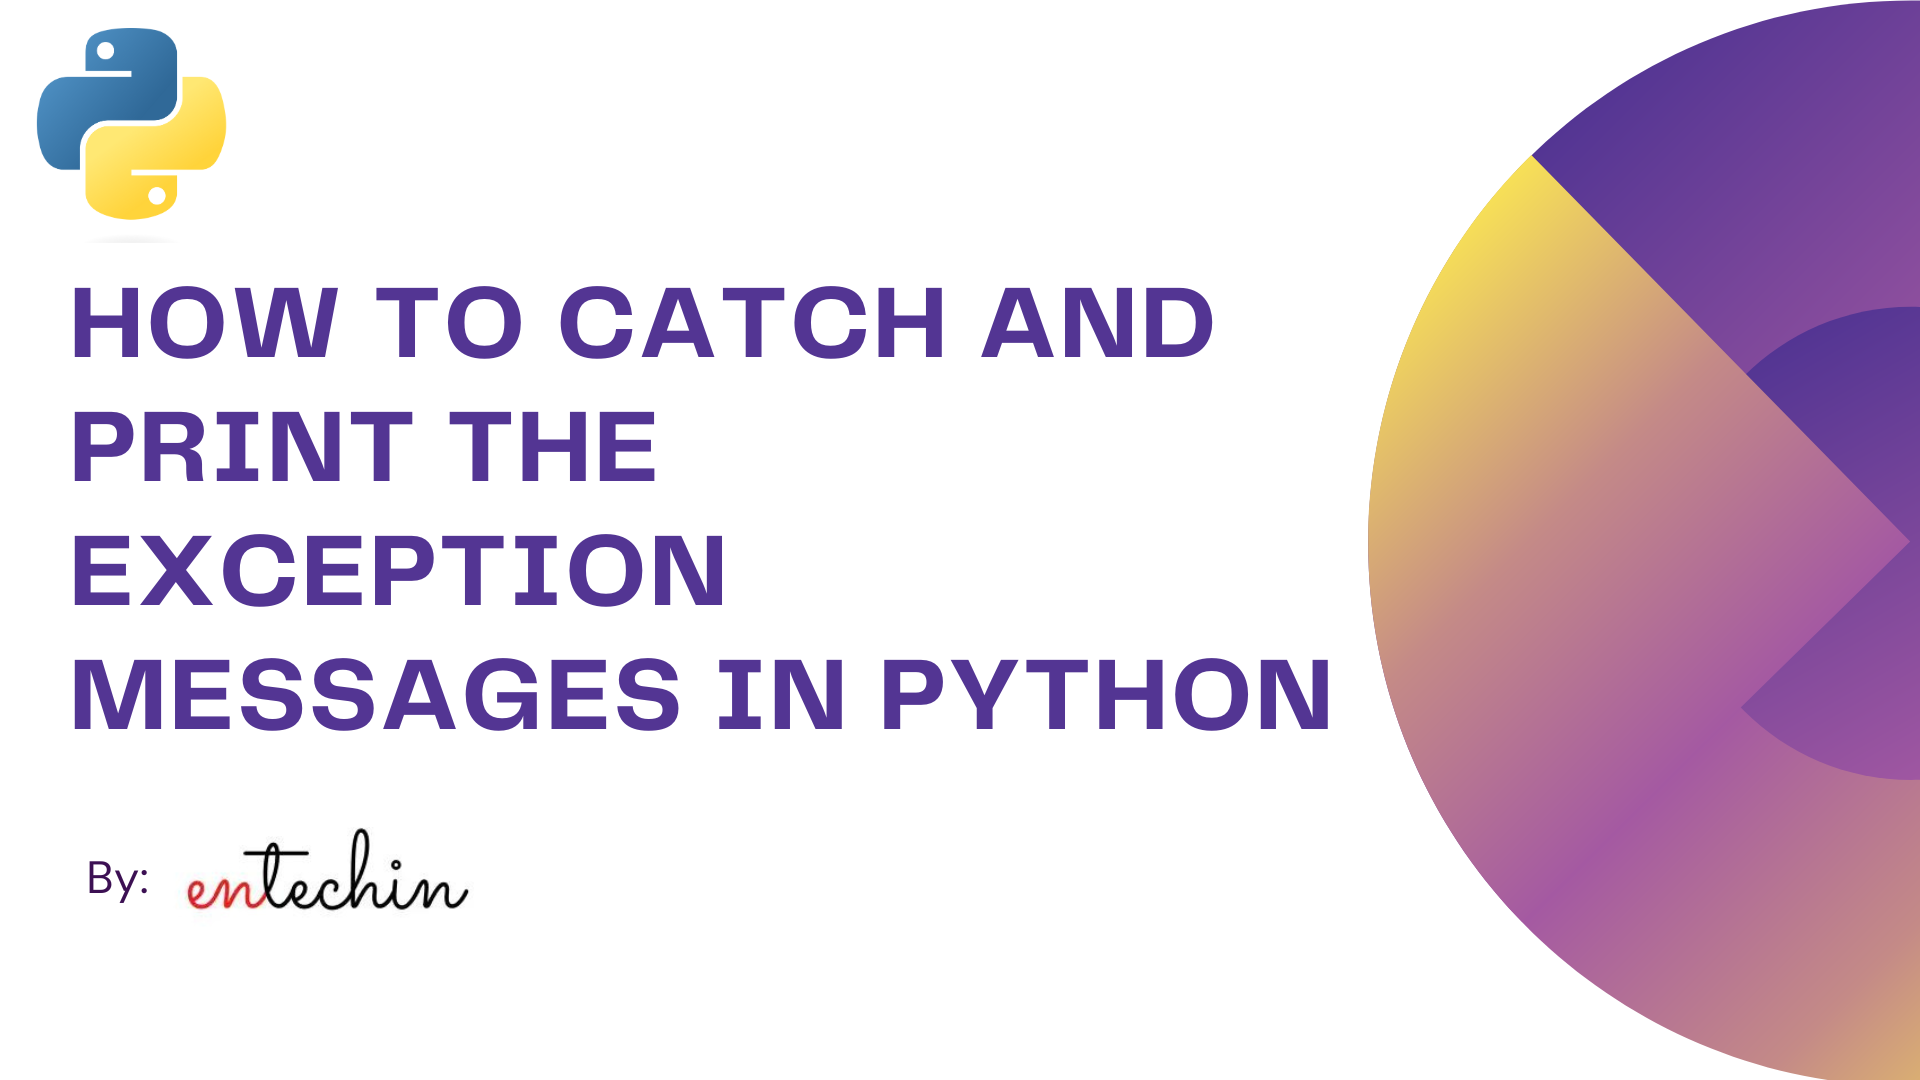 How to catch and print the exception messages in Python